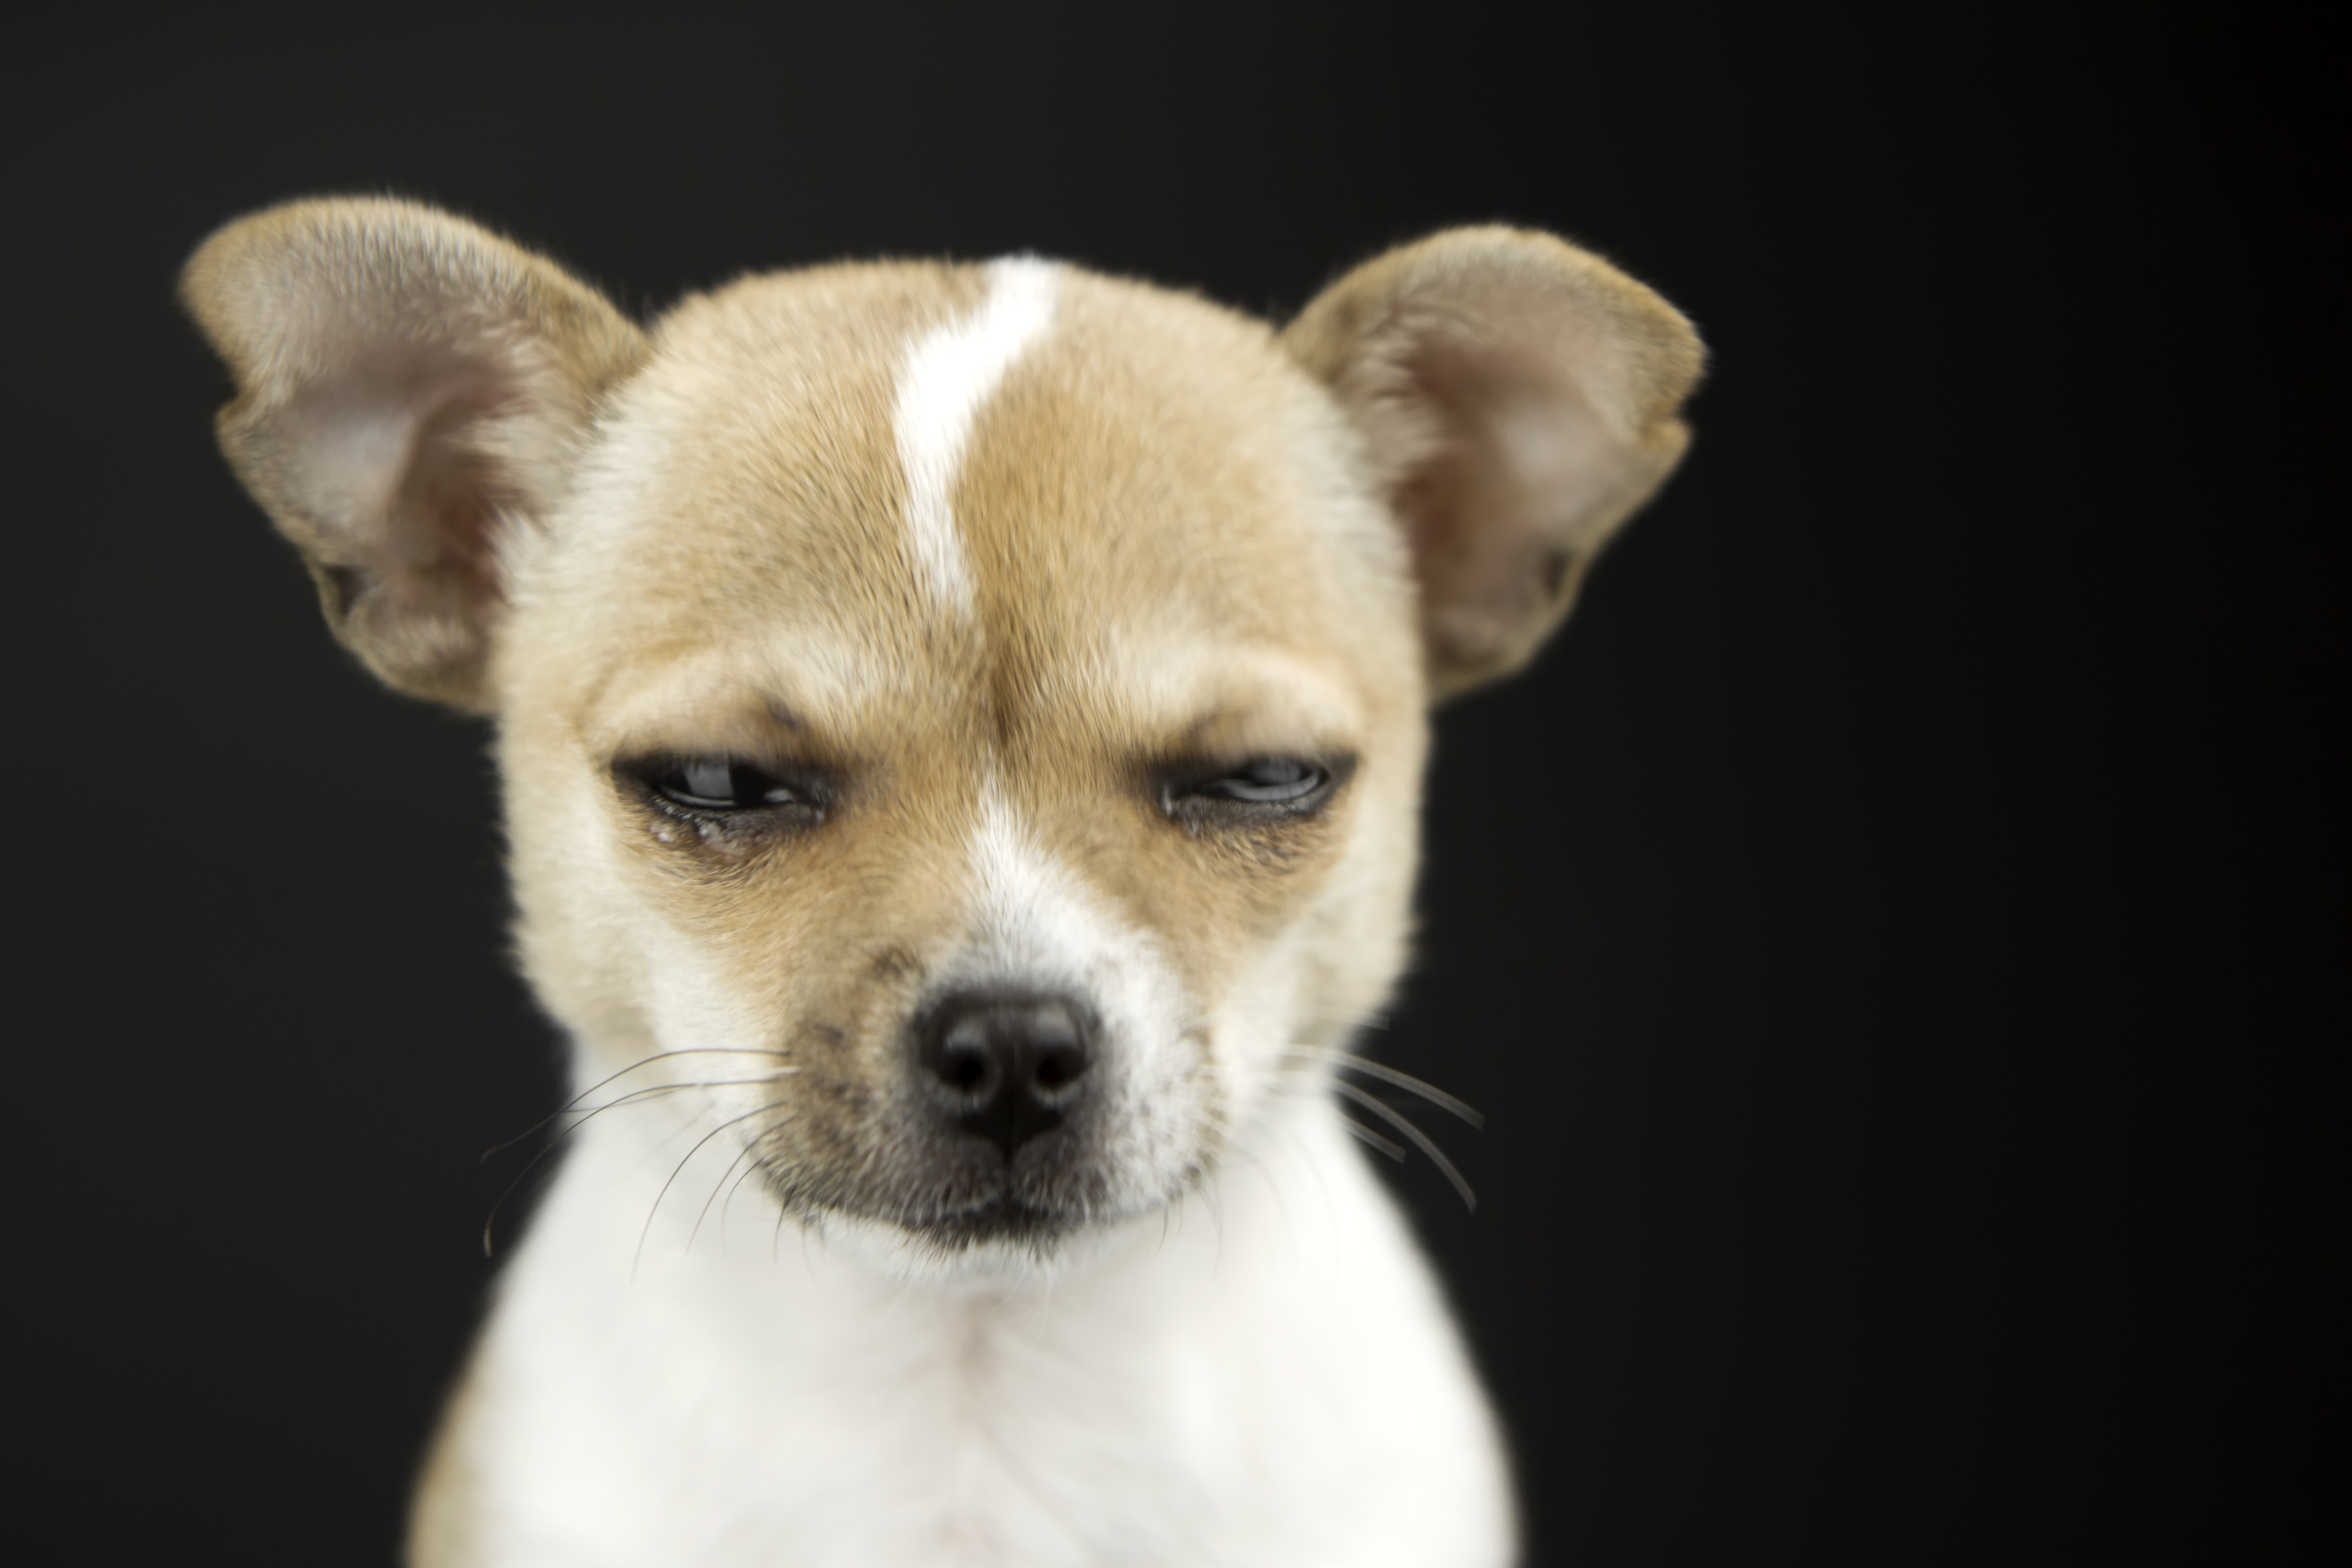 Chihuahua with a skeptical expression on a black background